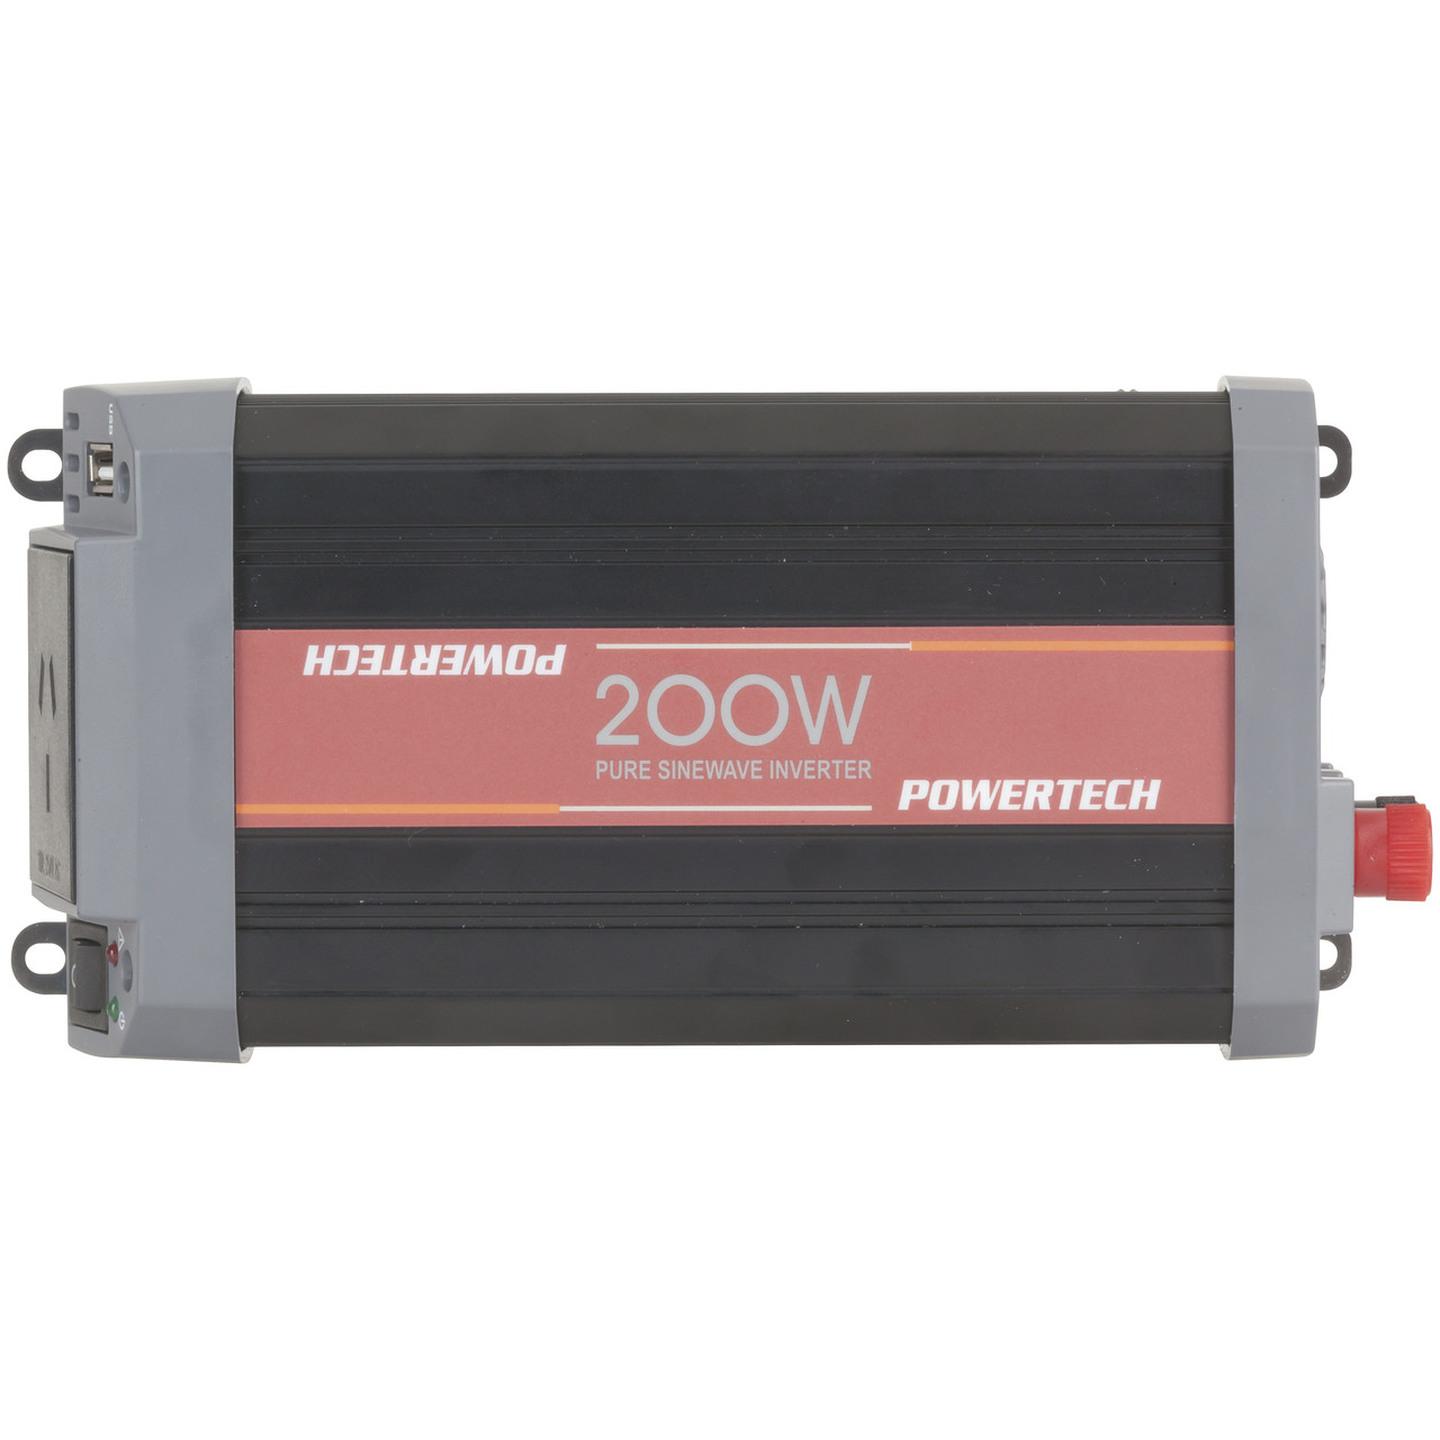 200W 12VDC to 230VAC Pure Sine Wave Inverter - Electrically Isolated